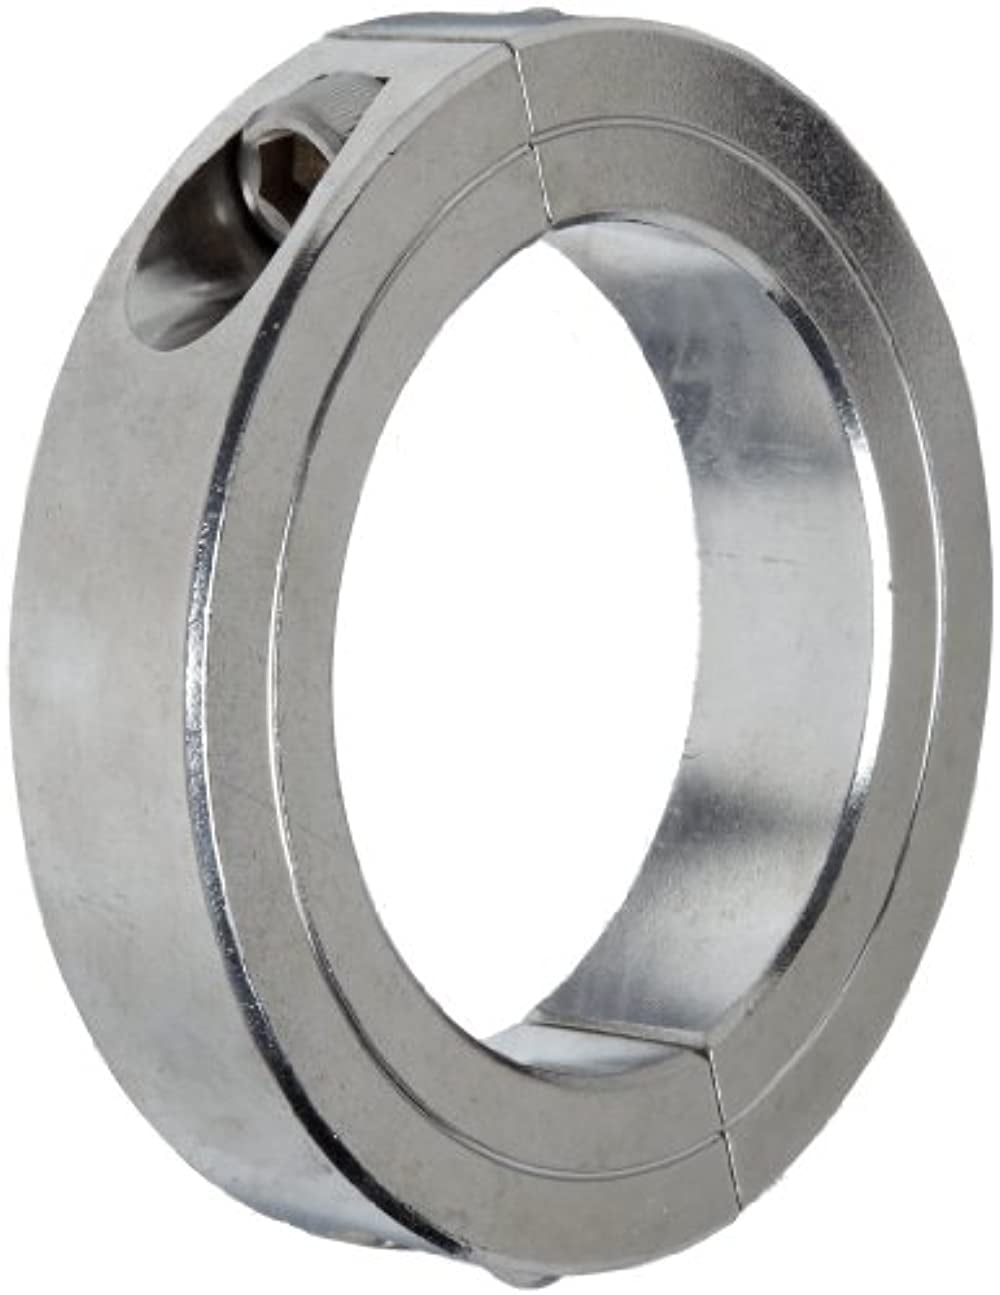 7/16 Bore One Piece Clamp Style Stainless Steel Climax Metal H1C-043-S Shaft Collar 5/16 Width 2 1/16 OD